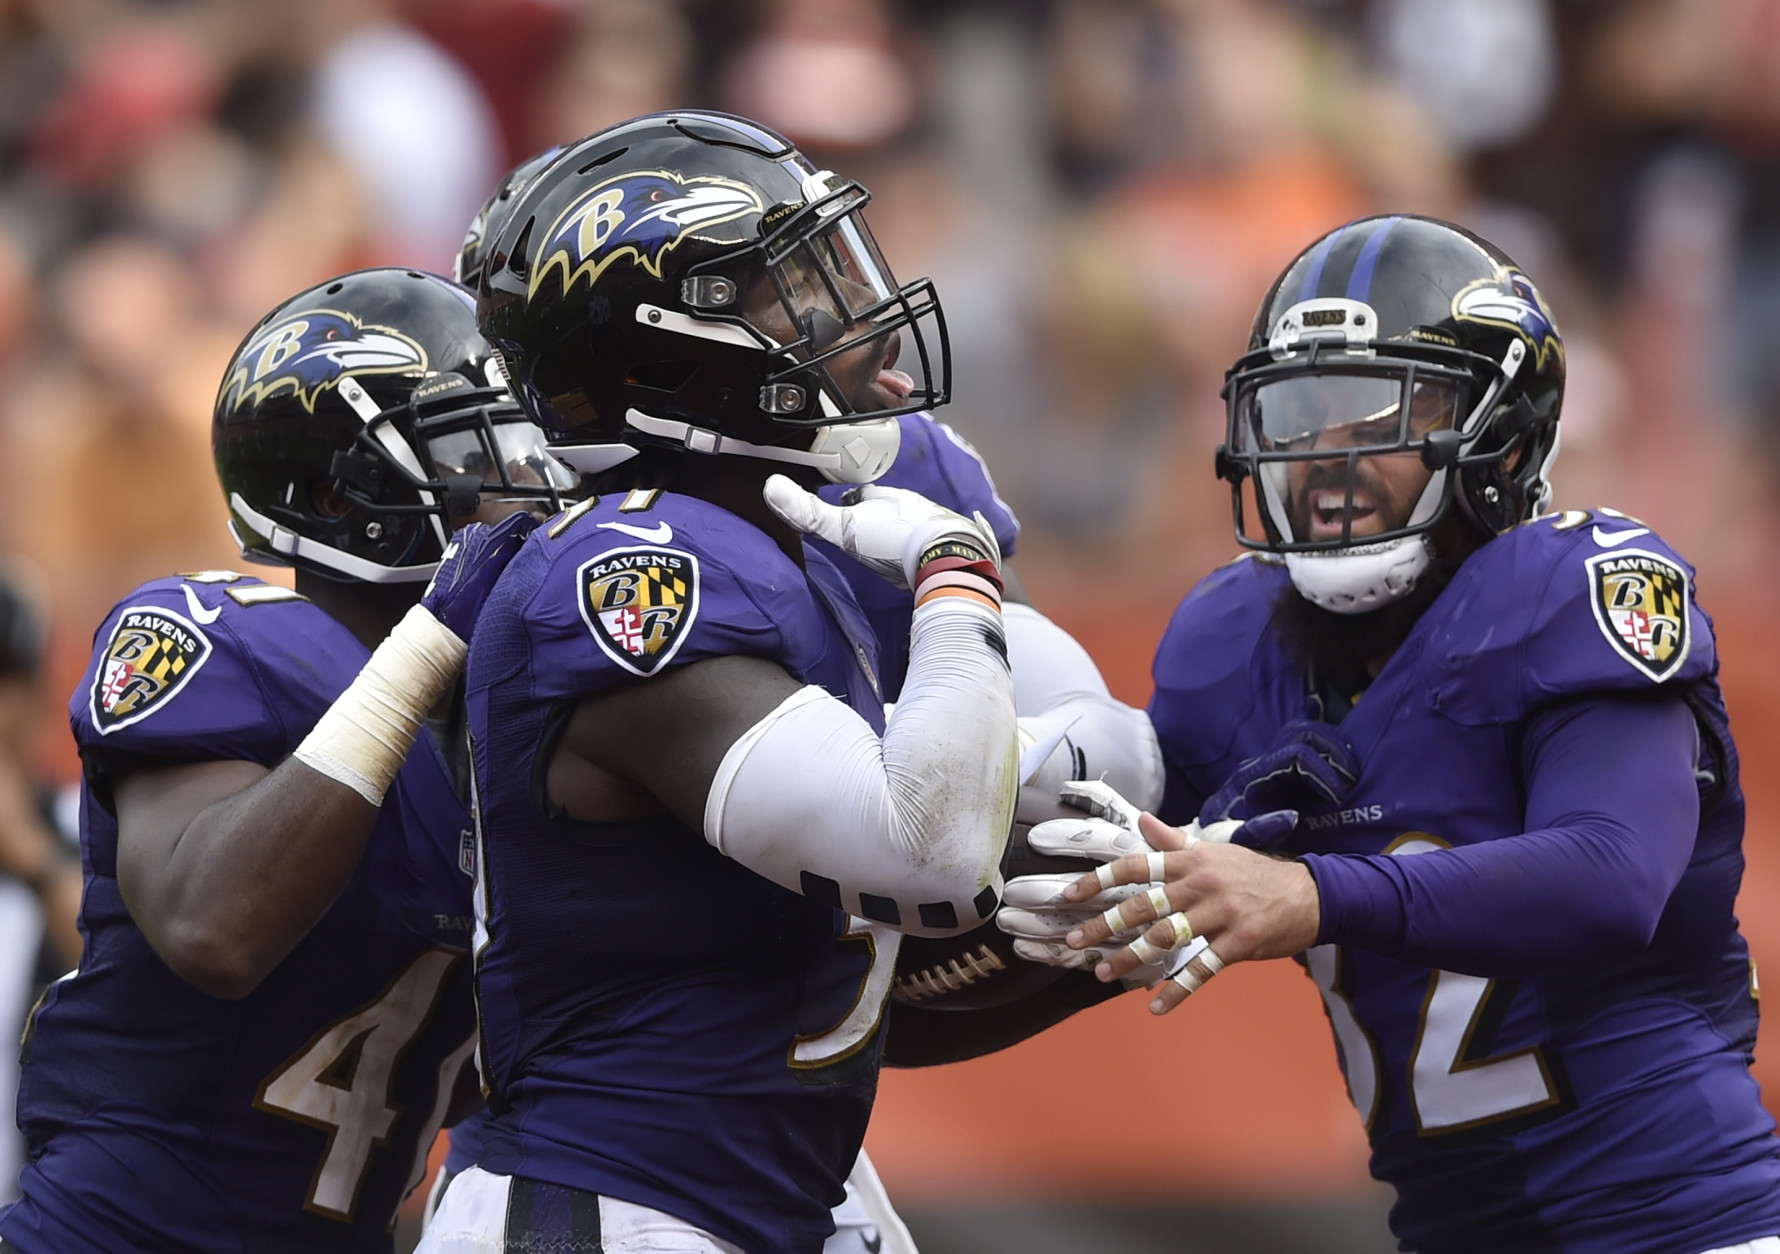 Baltimore Ravens inside linebacker C.J. Mosley (57) celebrates with strong safety Eric Weddle (32) after intercepting a pass in the fourth quarter of an NFL football game against the Cleveland Browns, Sunday, Sept. 18, 2016, in Cleveland. Baltimore won 25-20. (AP Photo/David Richard)